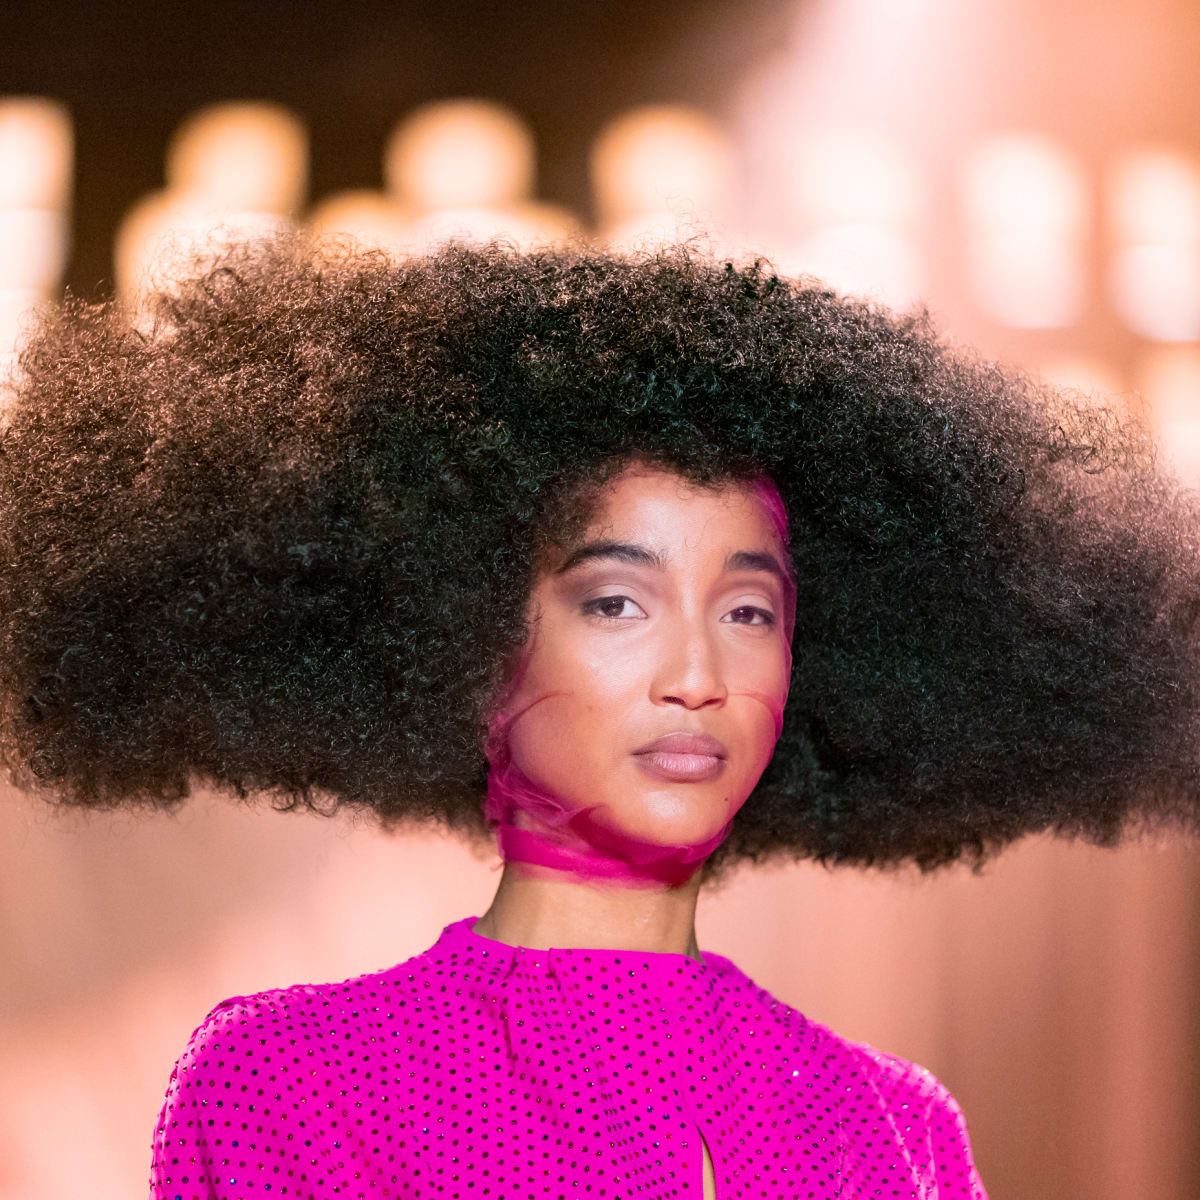 5 Standout Fall 2020 Beauty Trends From New York Fashion Week - Fashionista